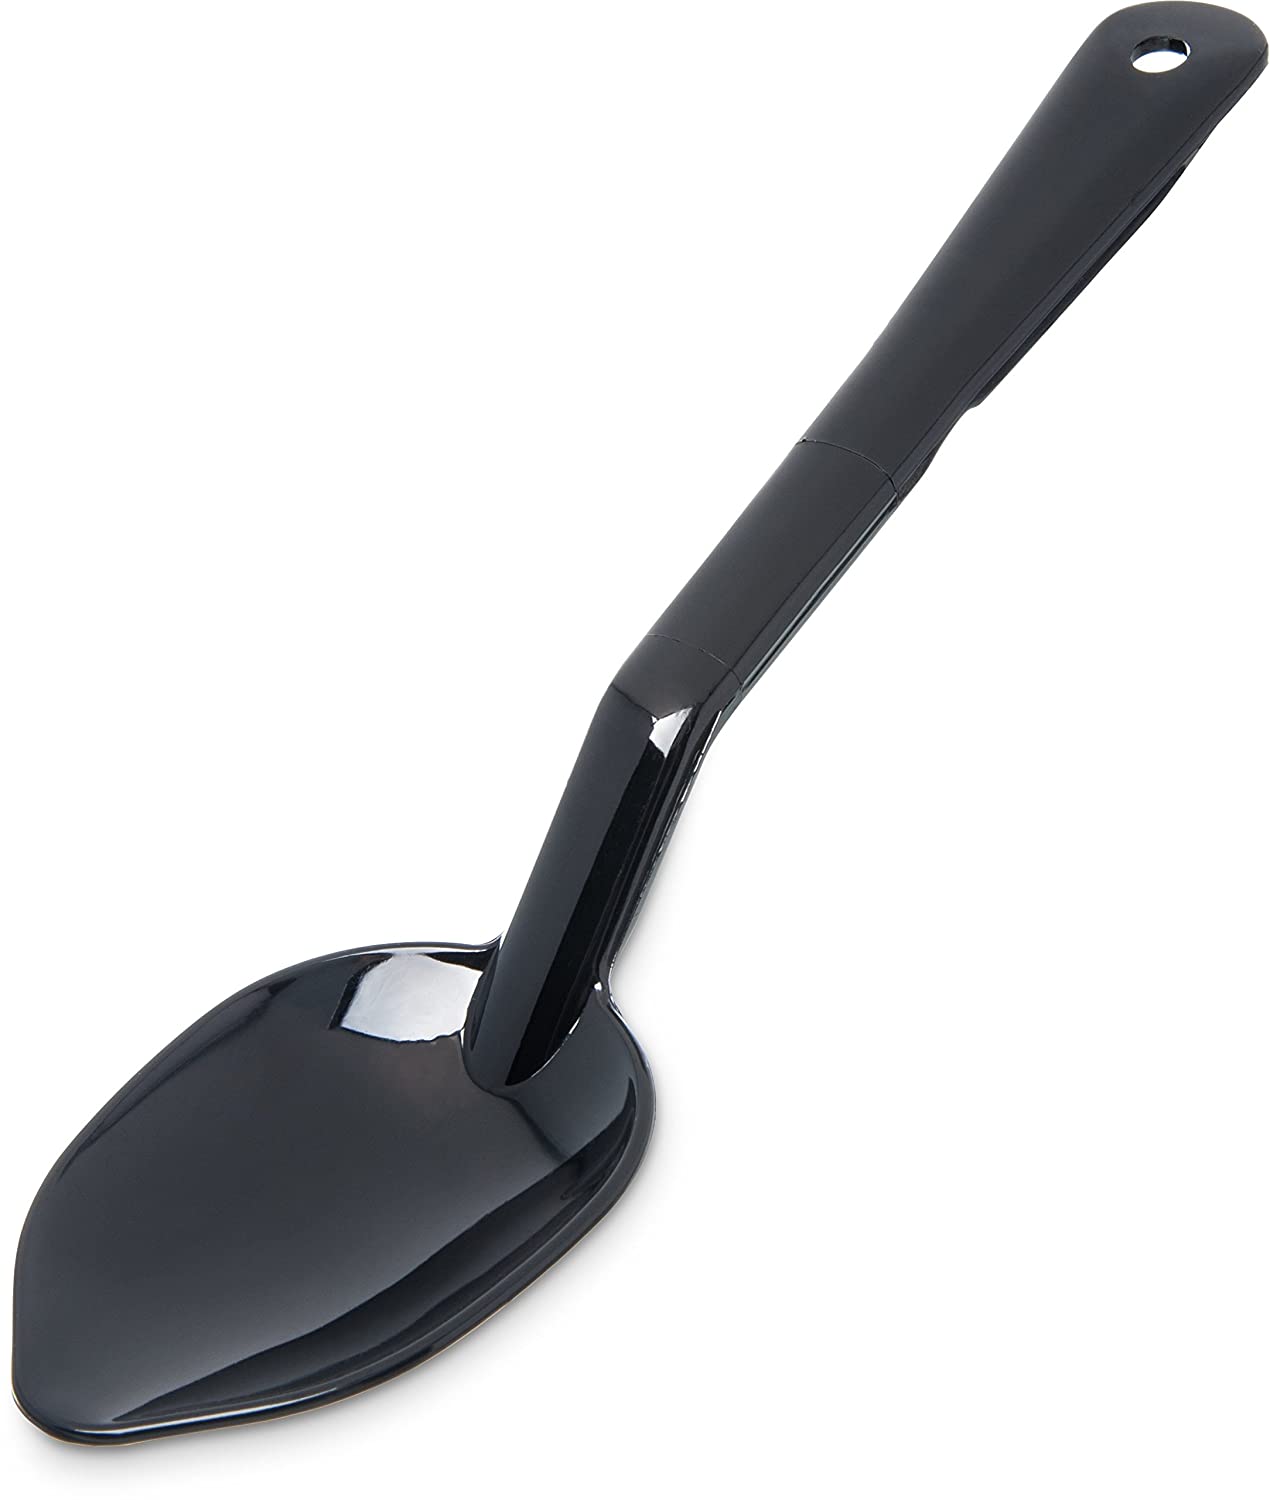 CFS 441003 Serving Spoons, 11-Inch, Polycarbonate, Black (Case of 12)